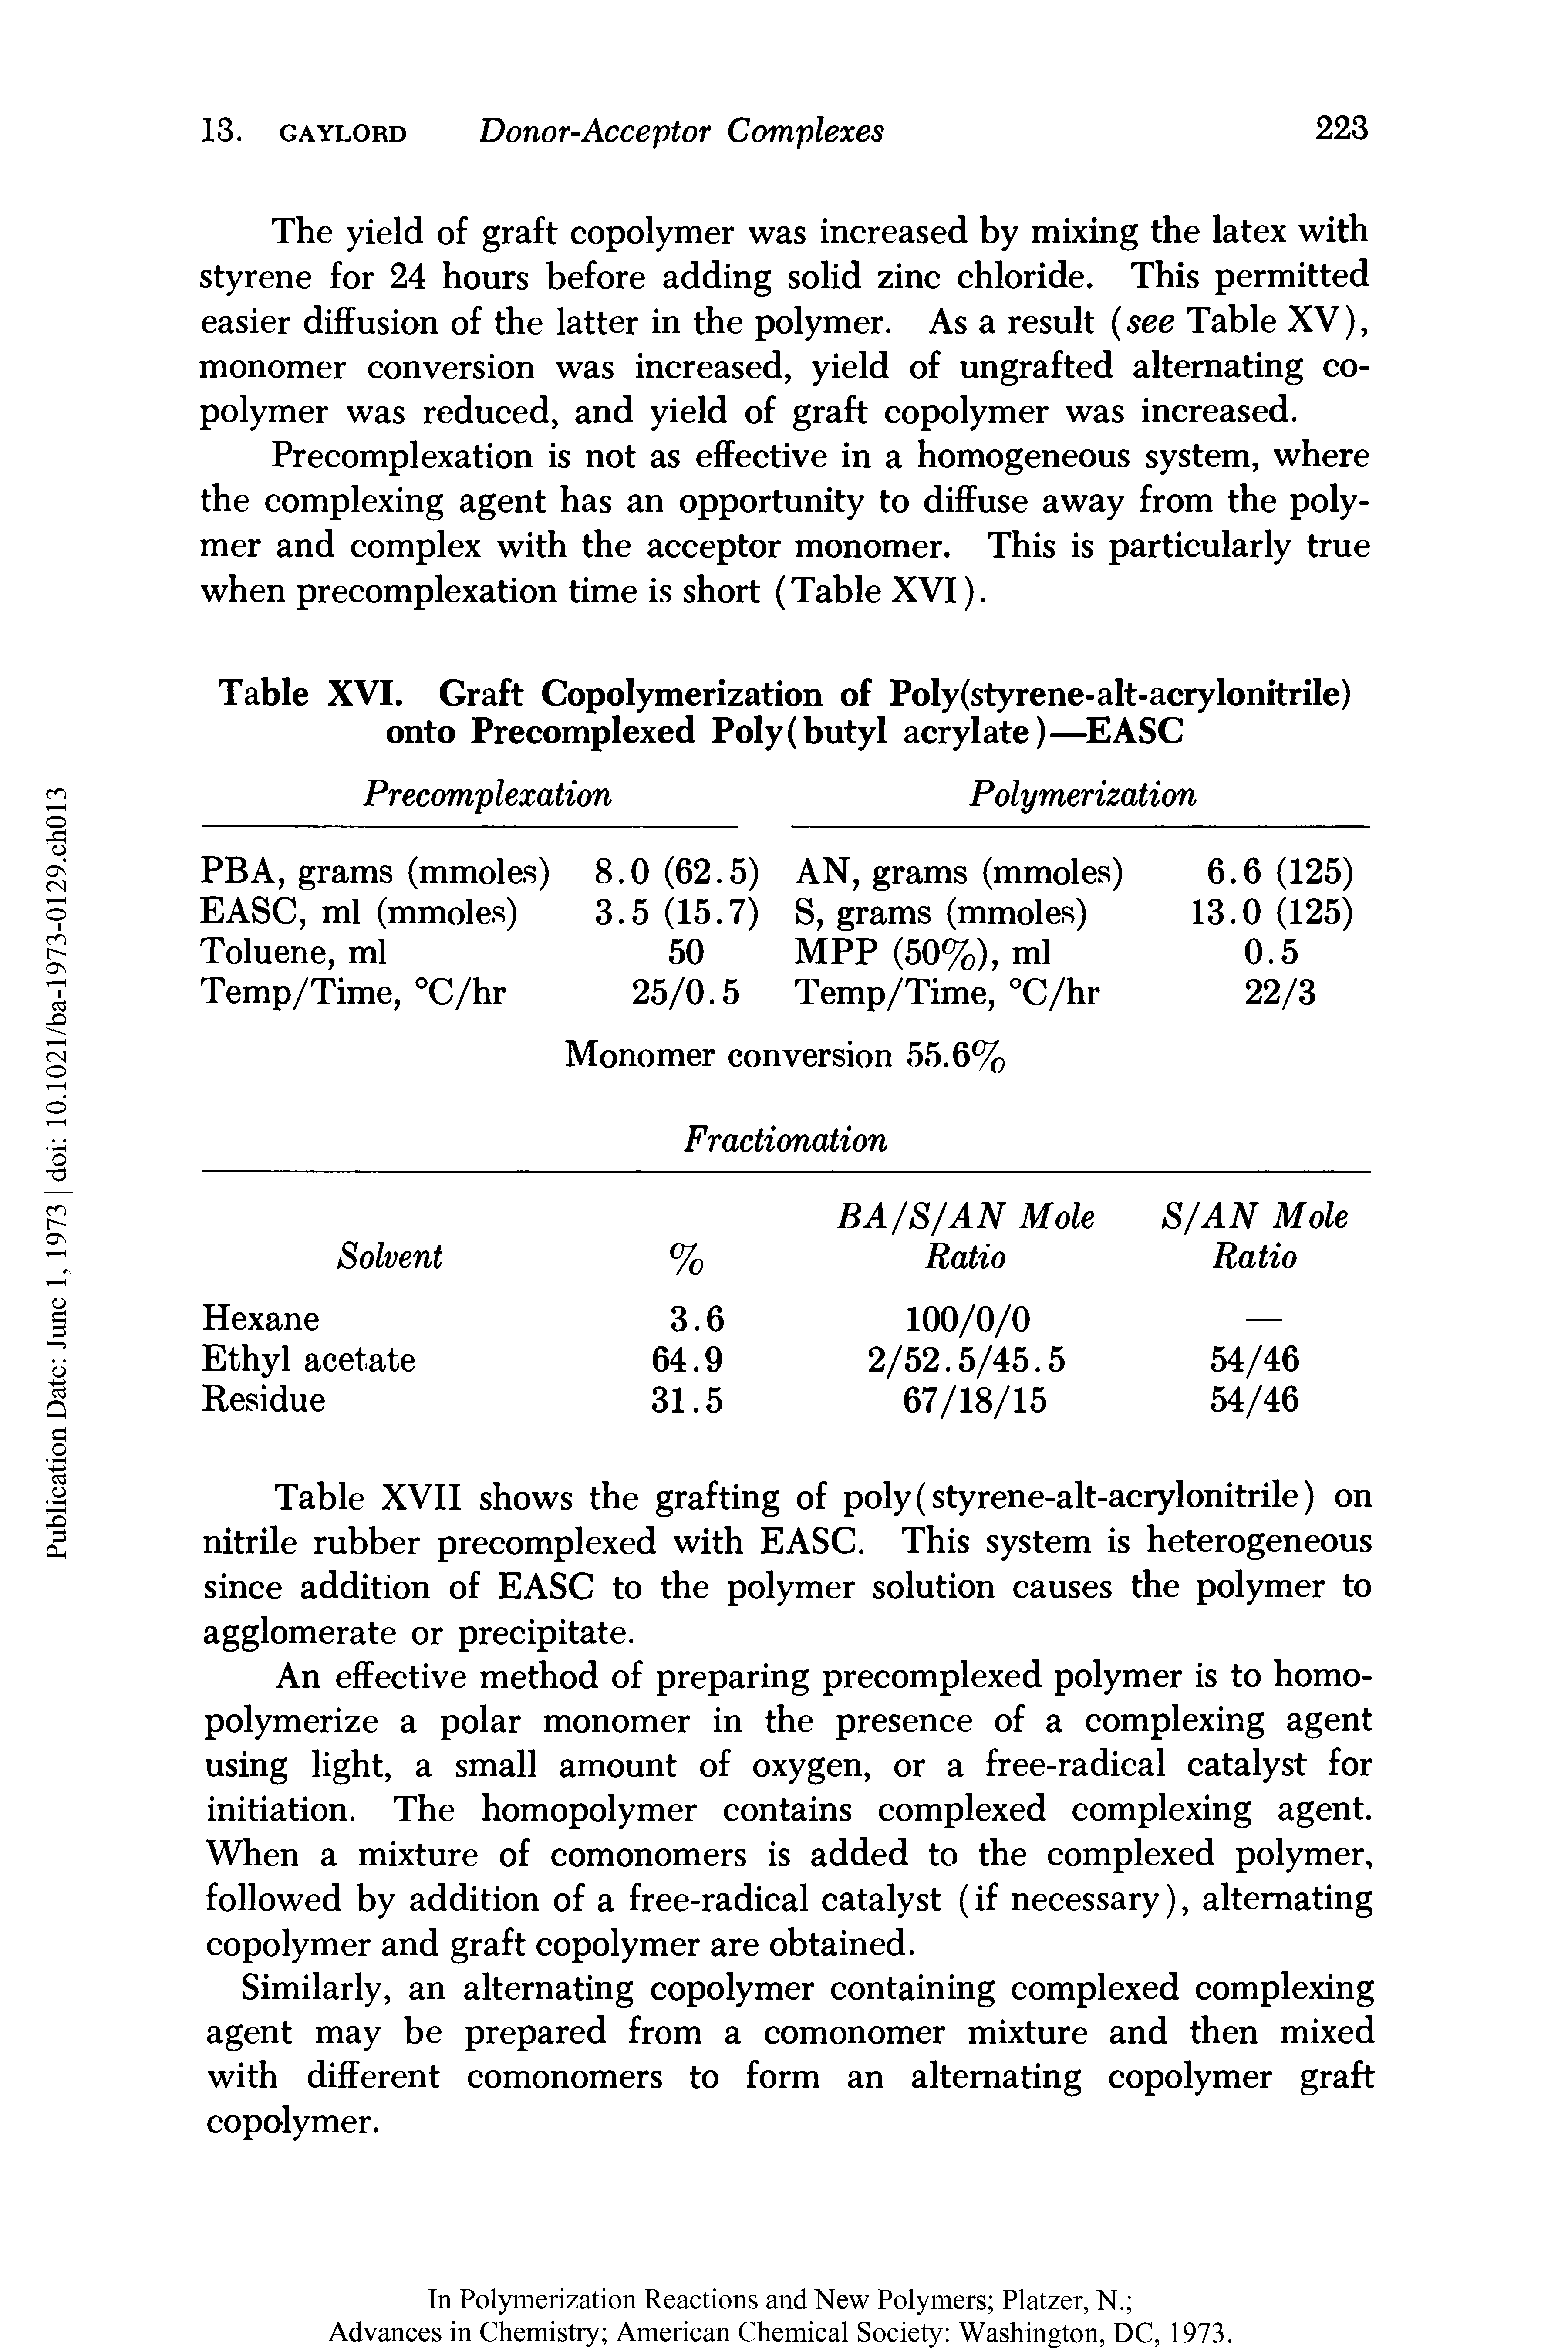 Table XVII shows the grafting of poly (styrene-alt-acrylonitrile) on nitrile rubber precomplexed with EASC. This system is heterogeneous since addition of EASC to the polymer solution causes the polymer to agglomerate or precipitate.